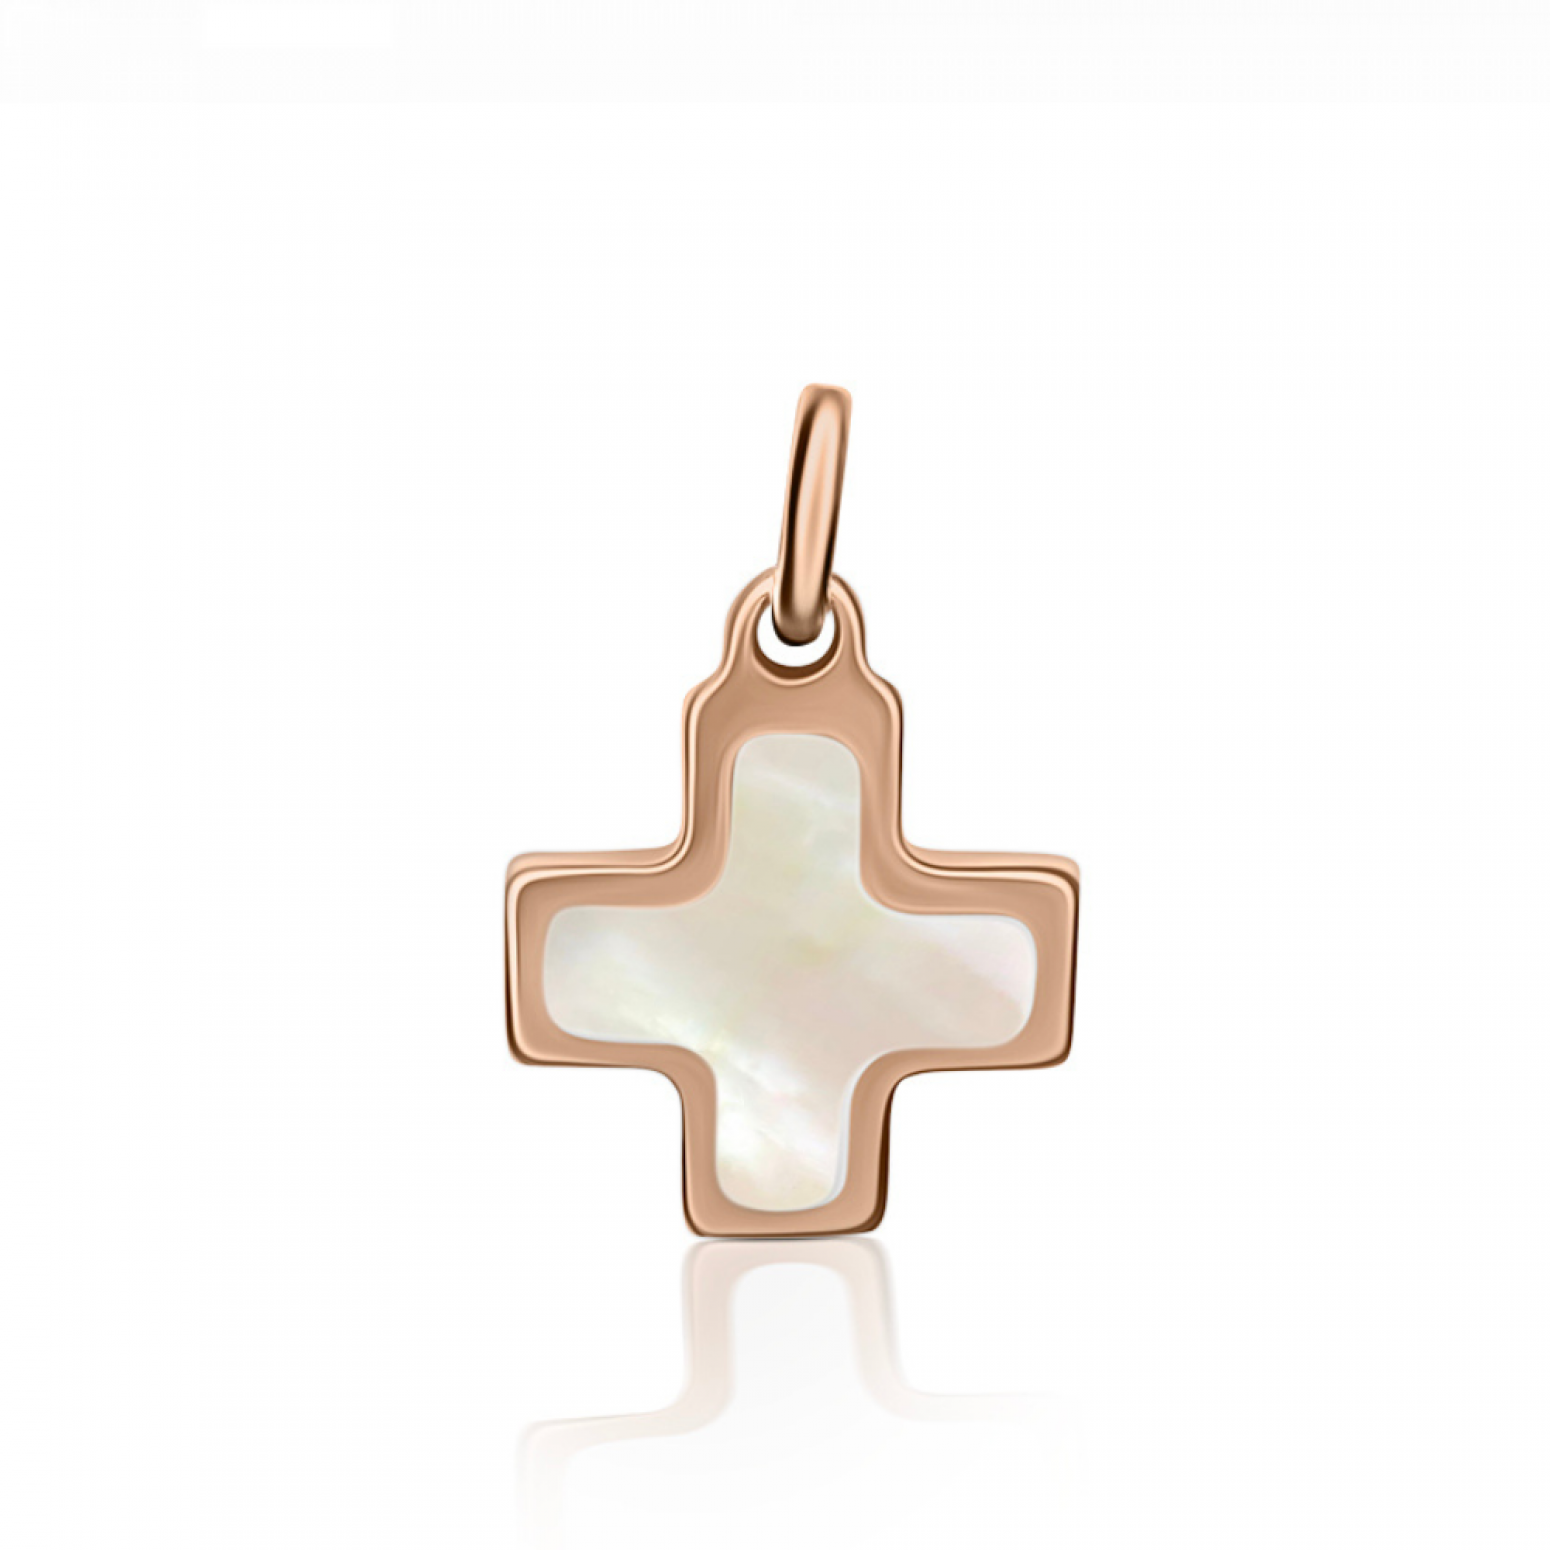 Cross Κ14 pink gold with mother of pearl, st1698 NECKLACES Κοσμηματα - chrilia.gr